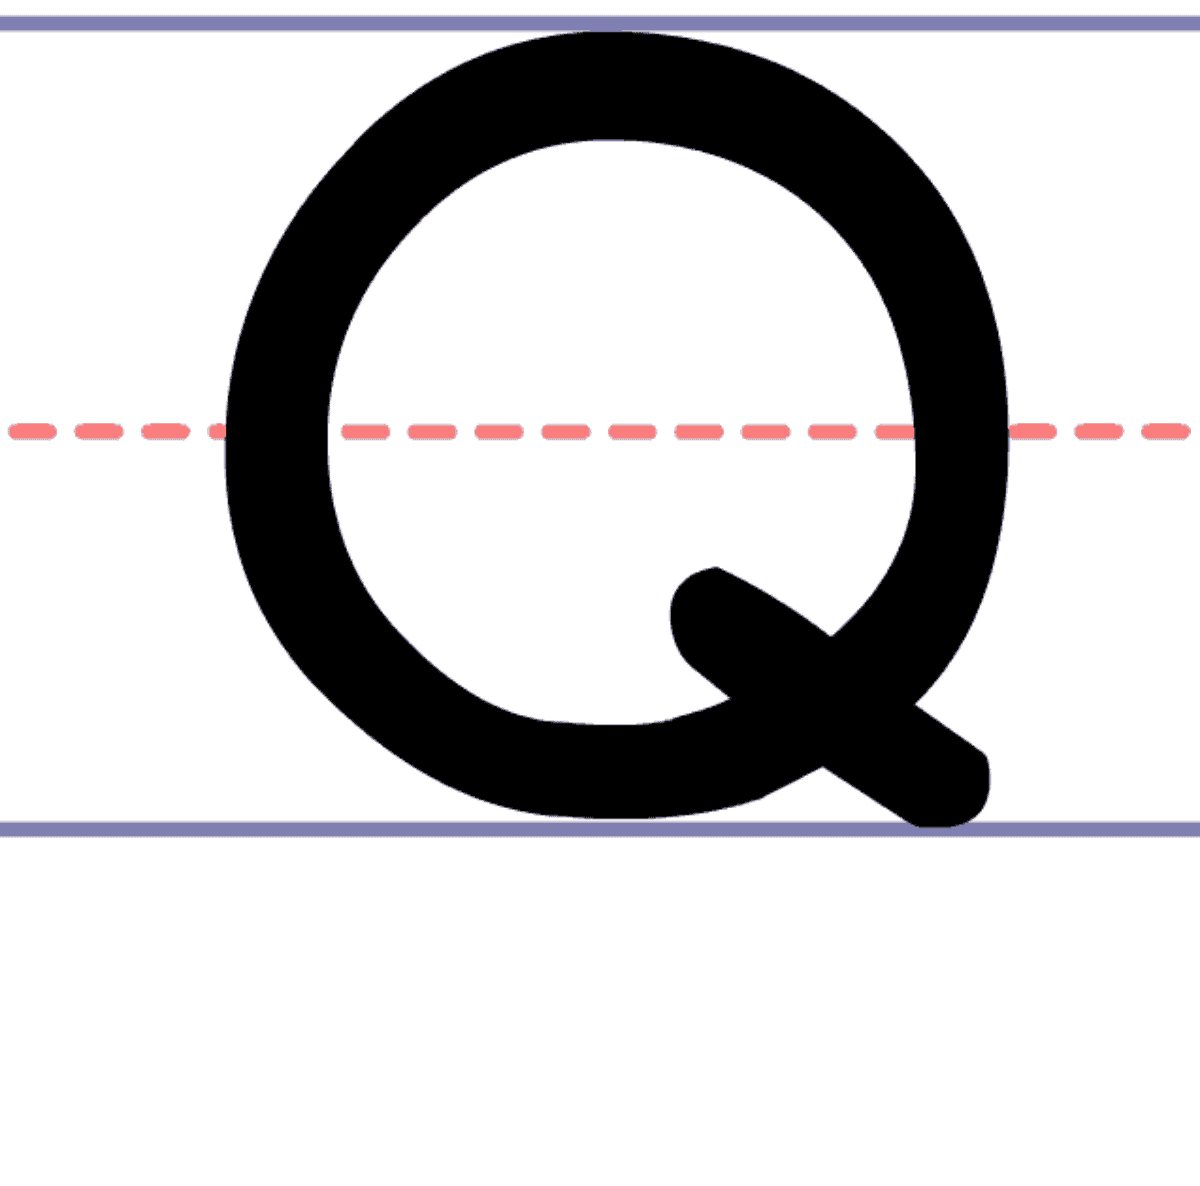 How to Write an Uppercase Q